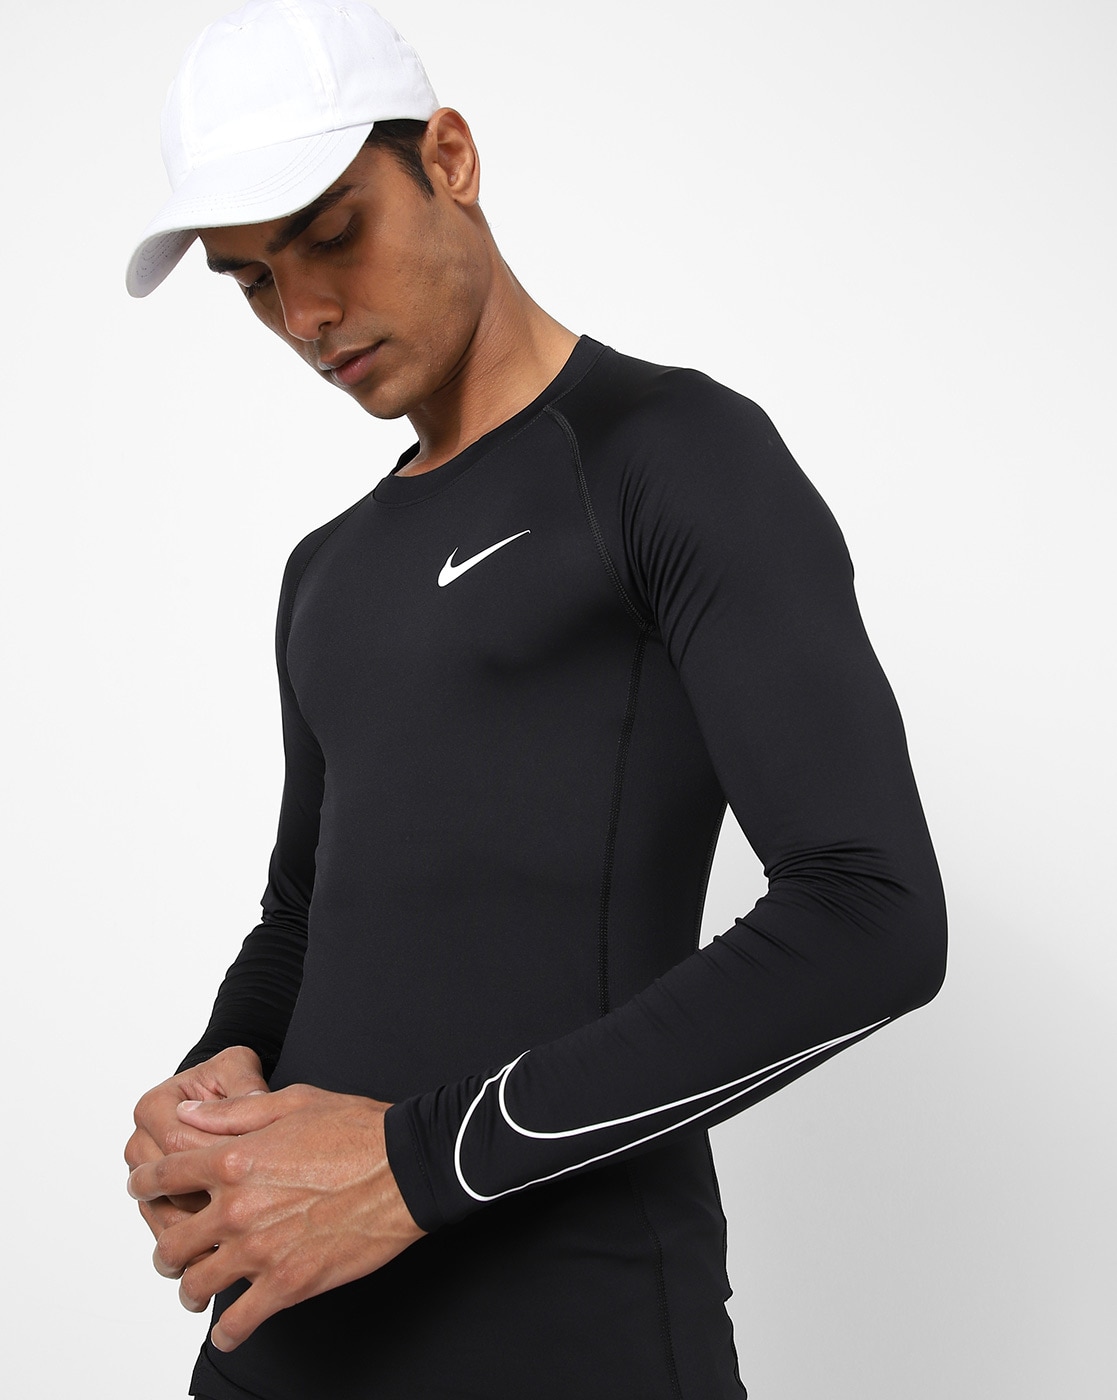 Nike Sleeveless Crew-Neck T-Shirt (Black) in Rohtak at best price by Pfc  Clothing Private Limited - Justdial